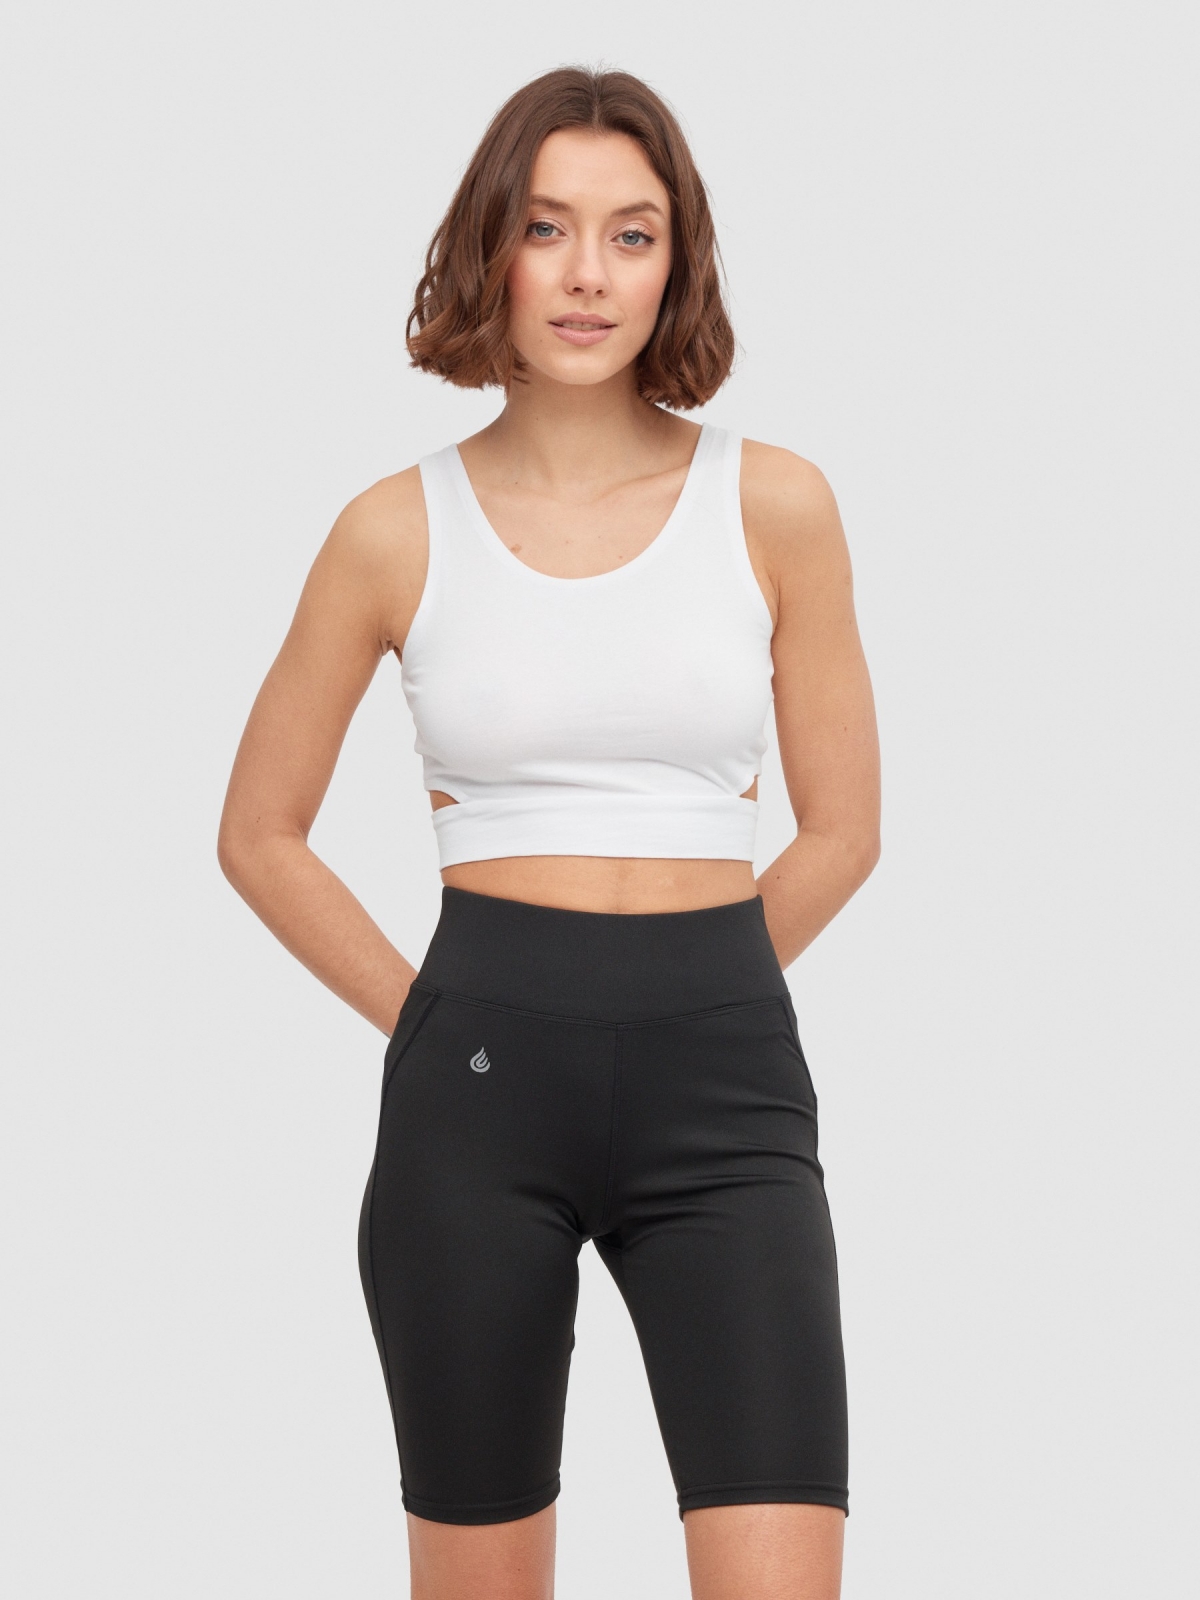 Basic cycling leggings black front view